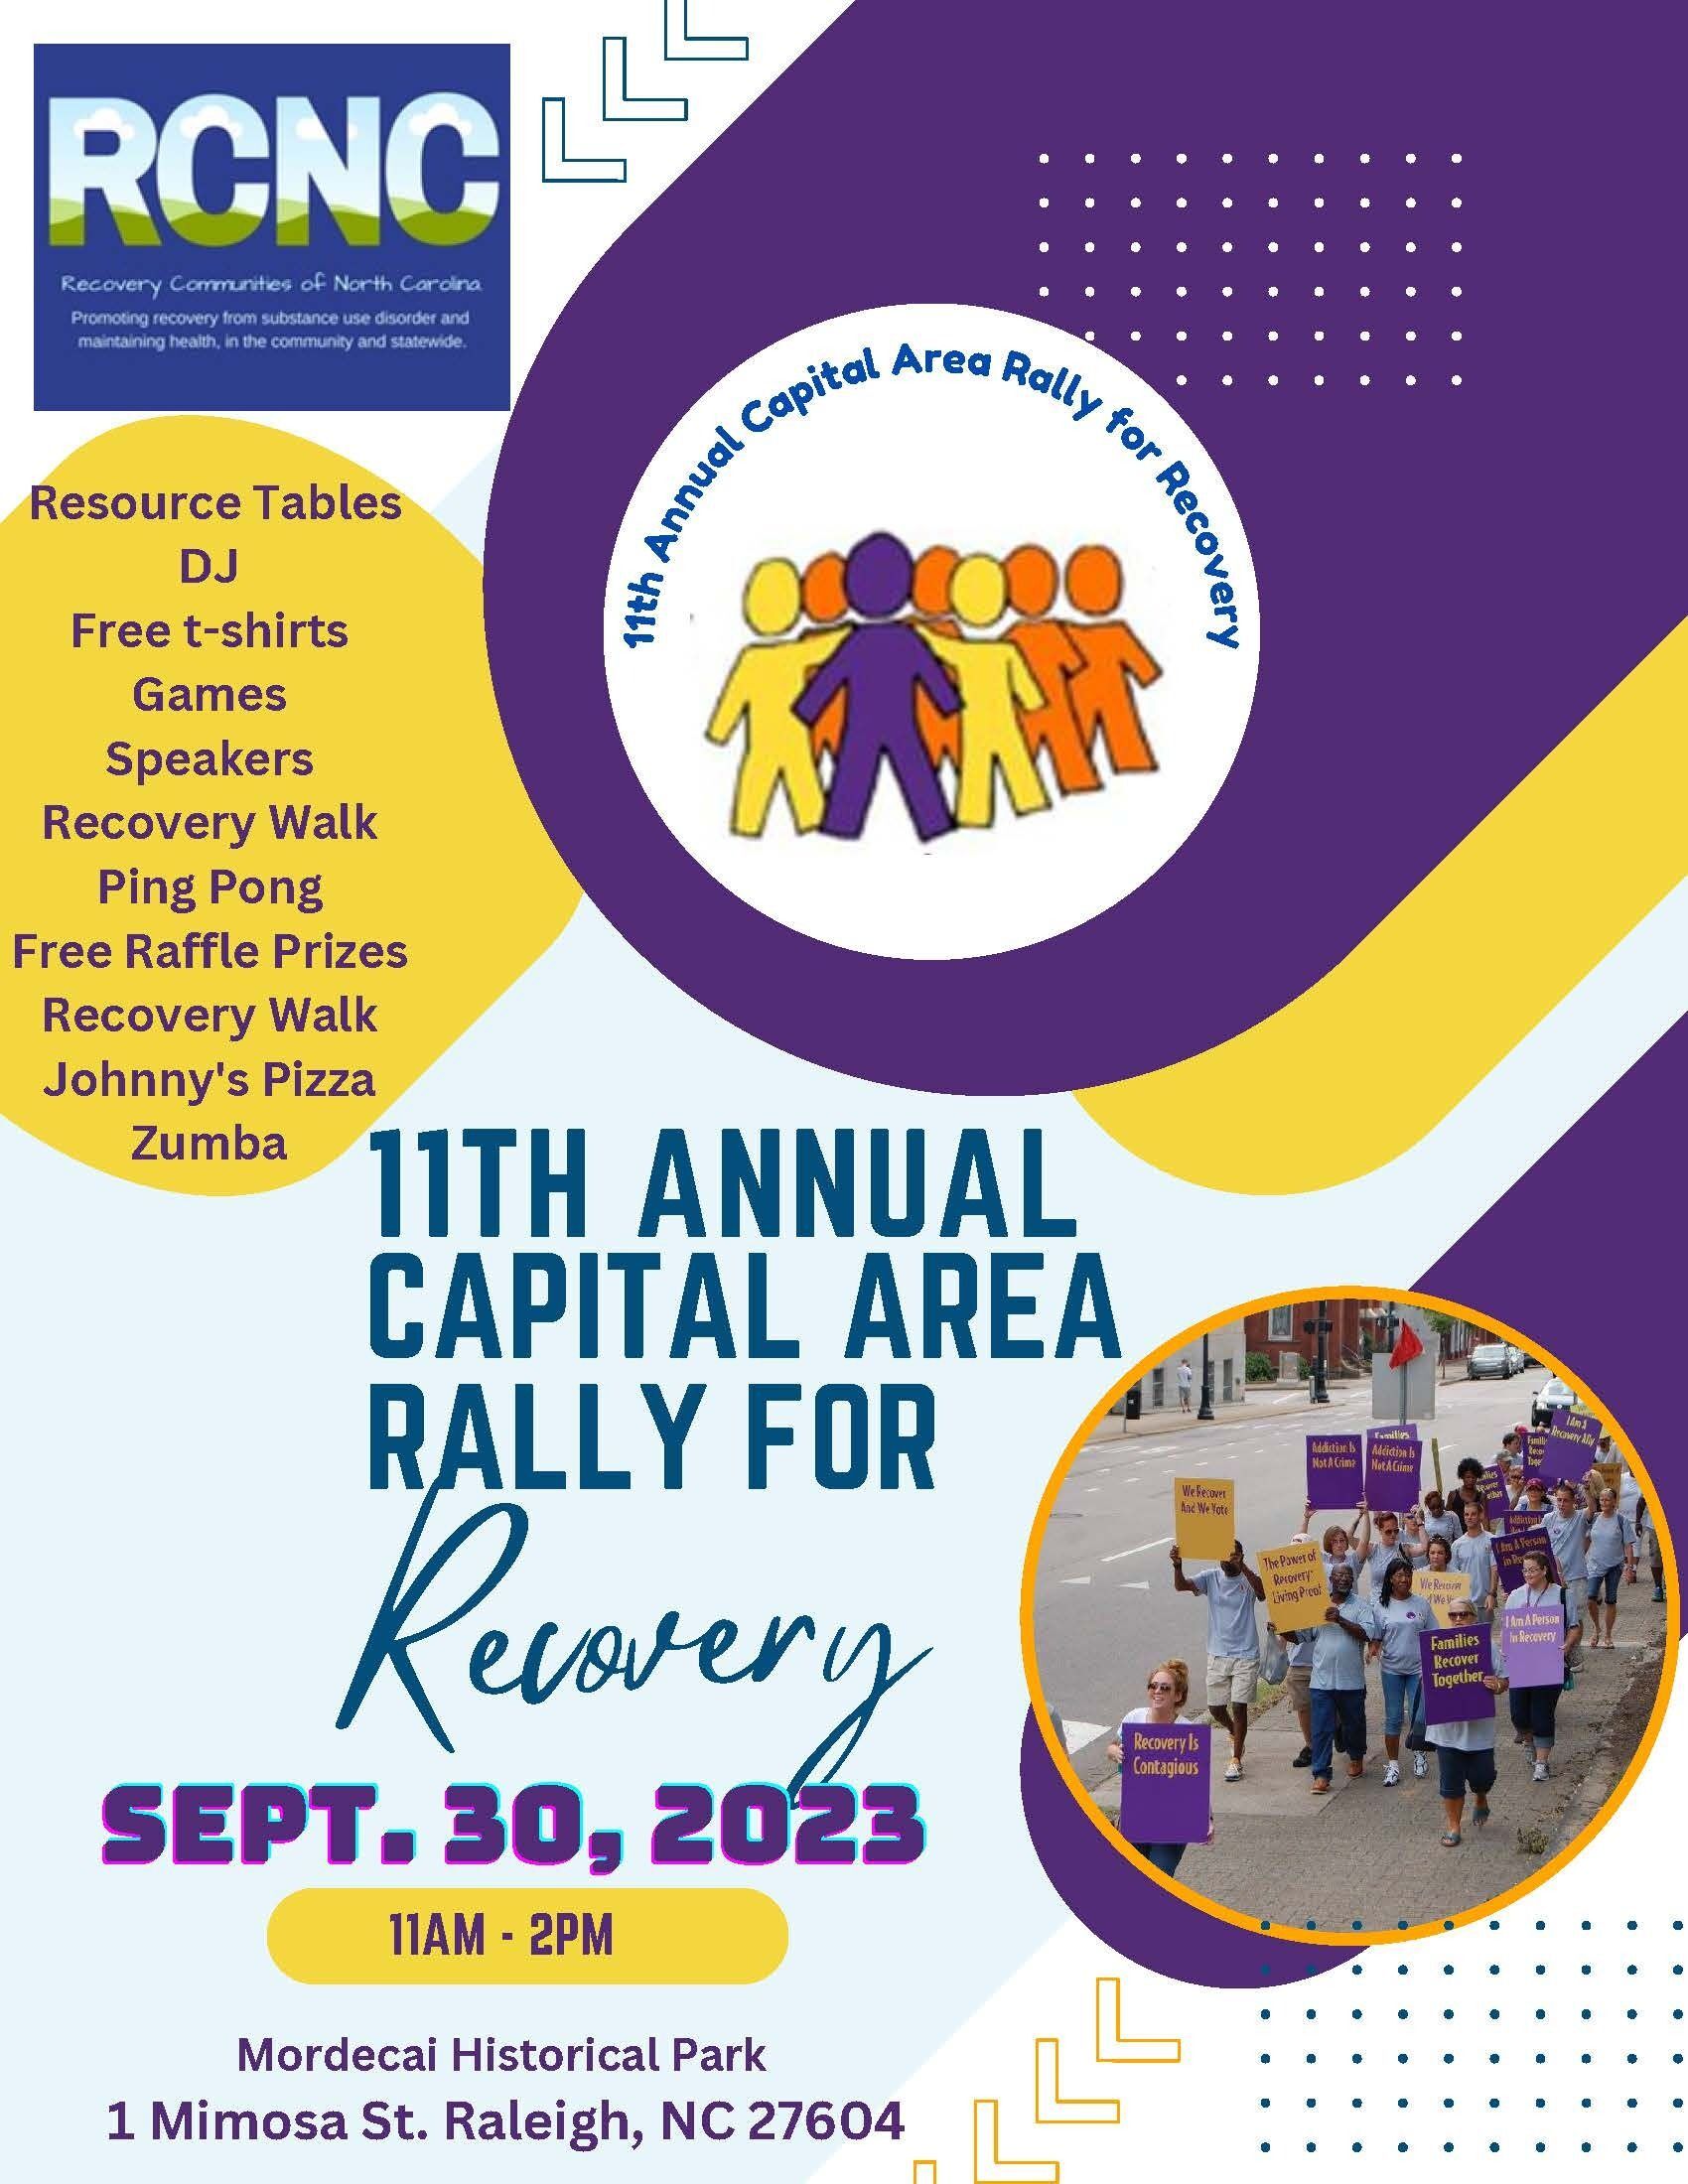 2023 RCNC Capital Area Rally for Recovery Event Flyer